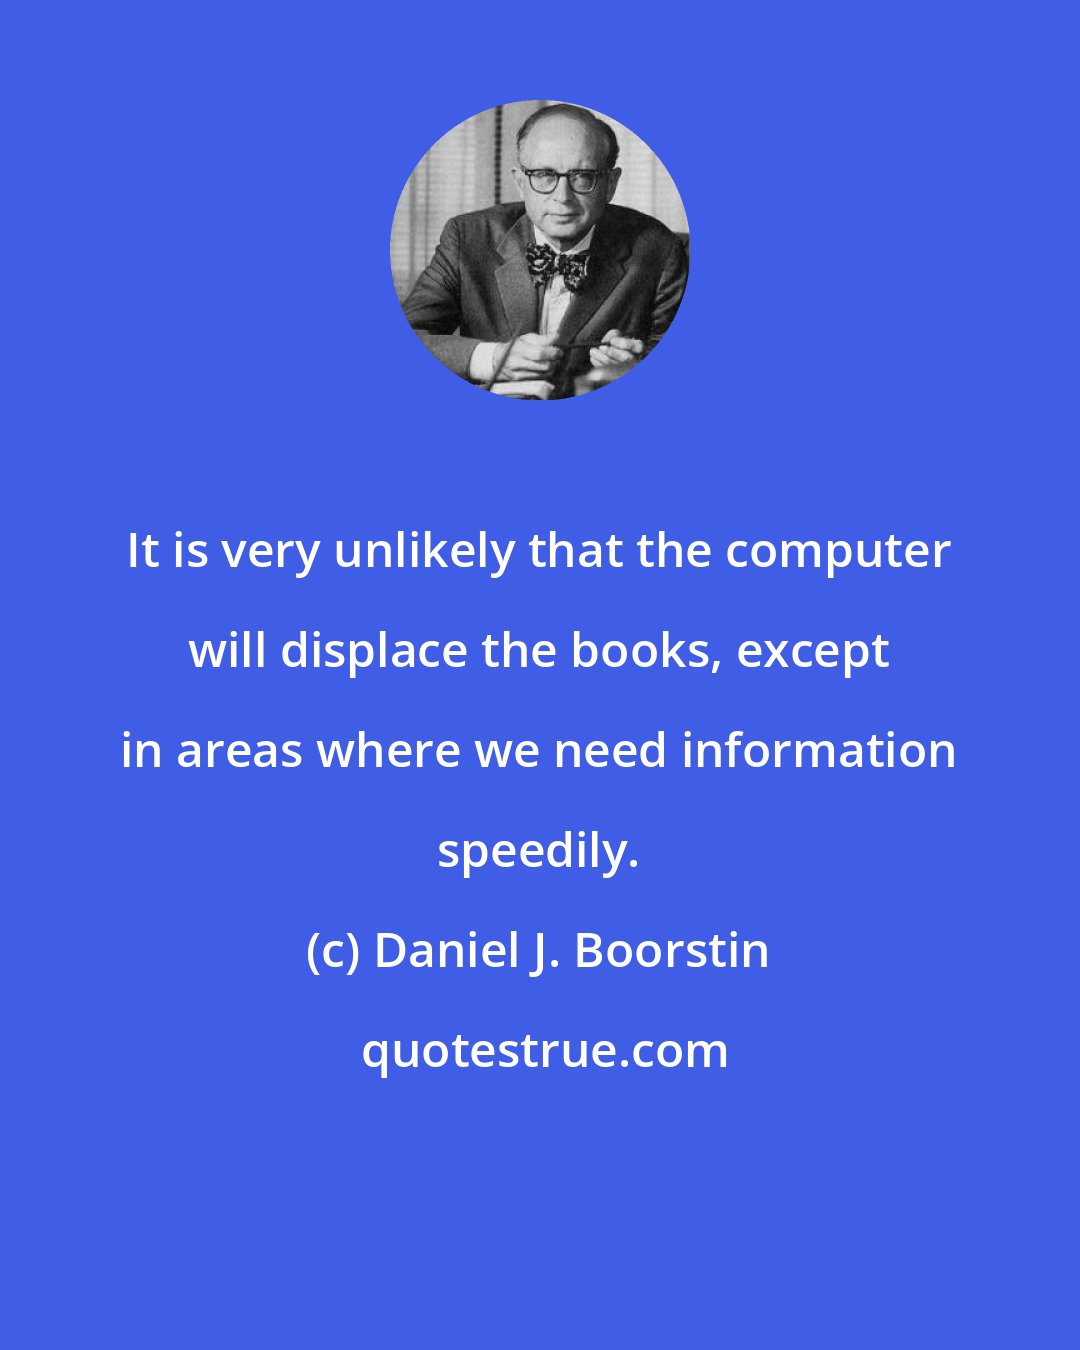 Daniel J. Boorstin: It is very unlikely that the computer will displace the books, except in areas where we need information speedily.